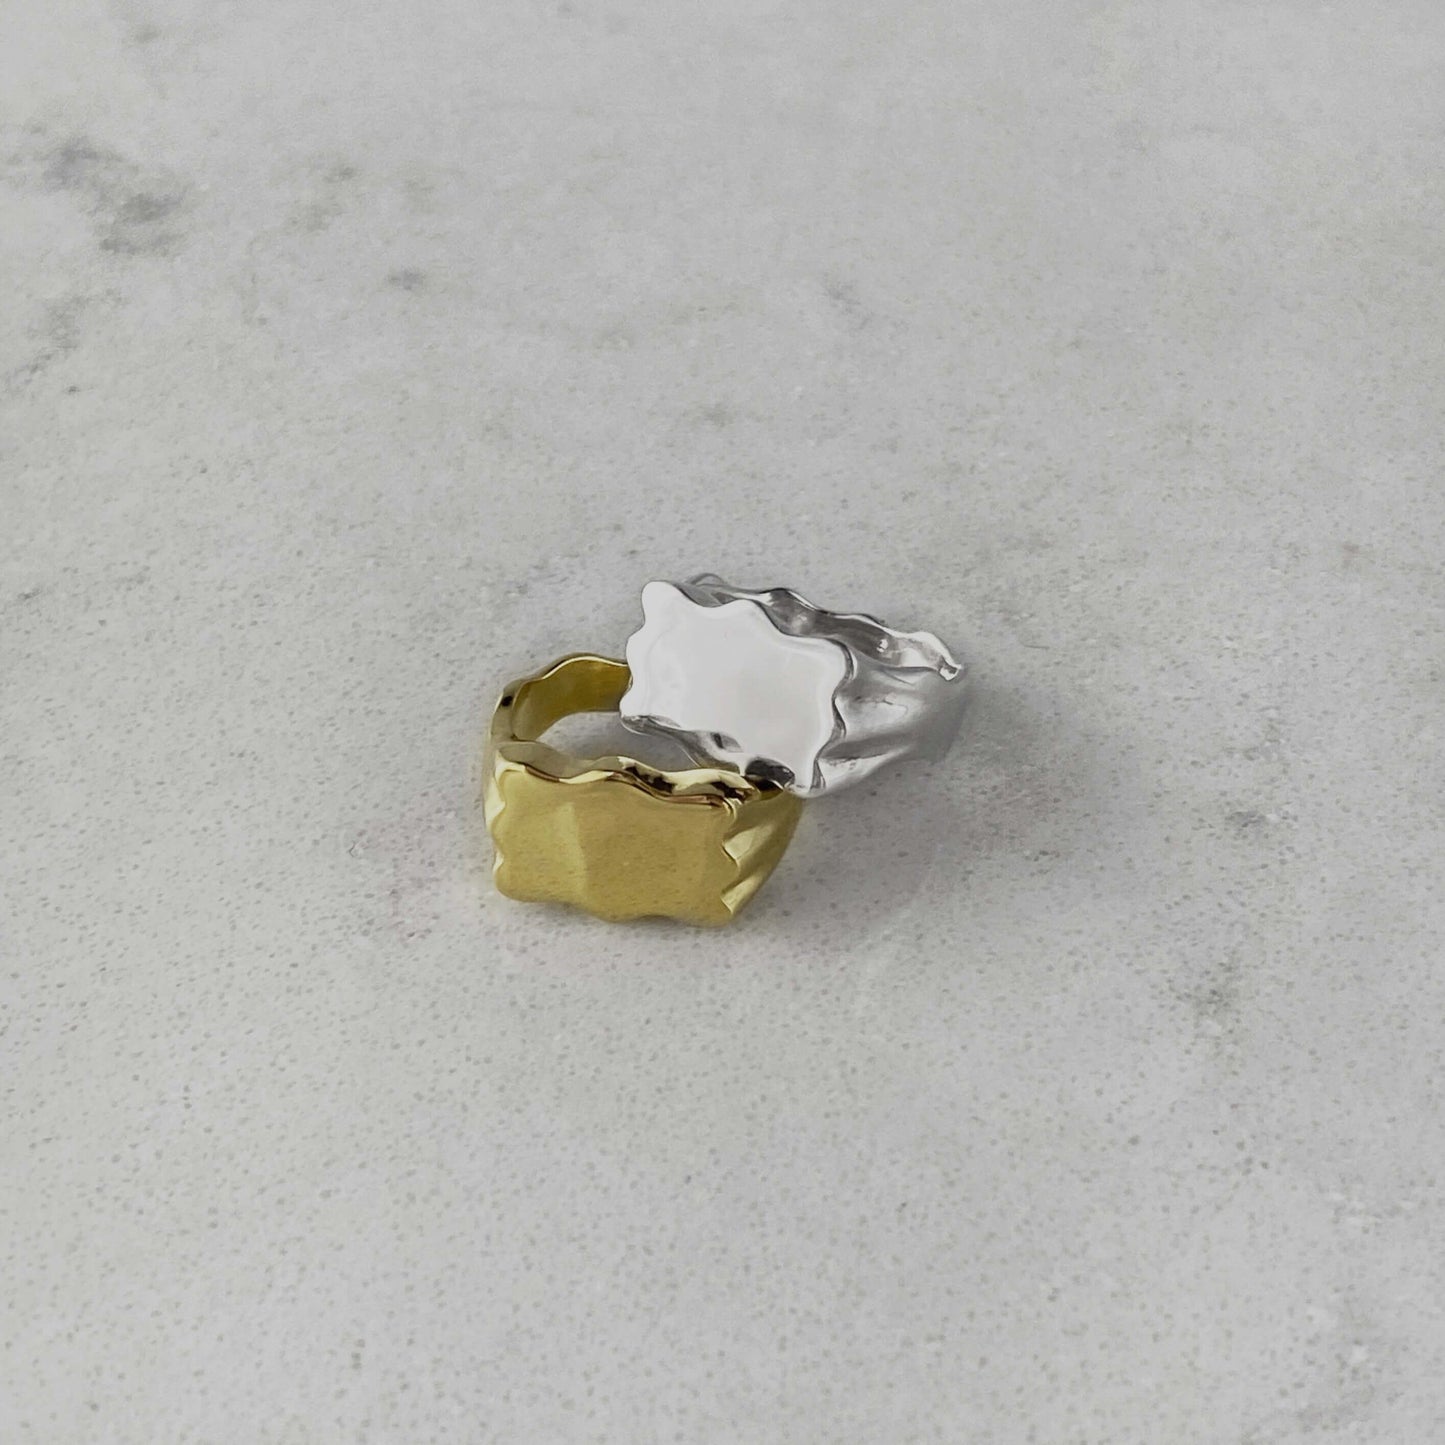 Product photo of two signet rings, one in silver and one in gold